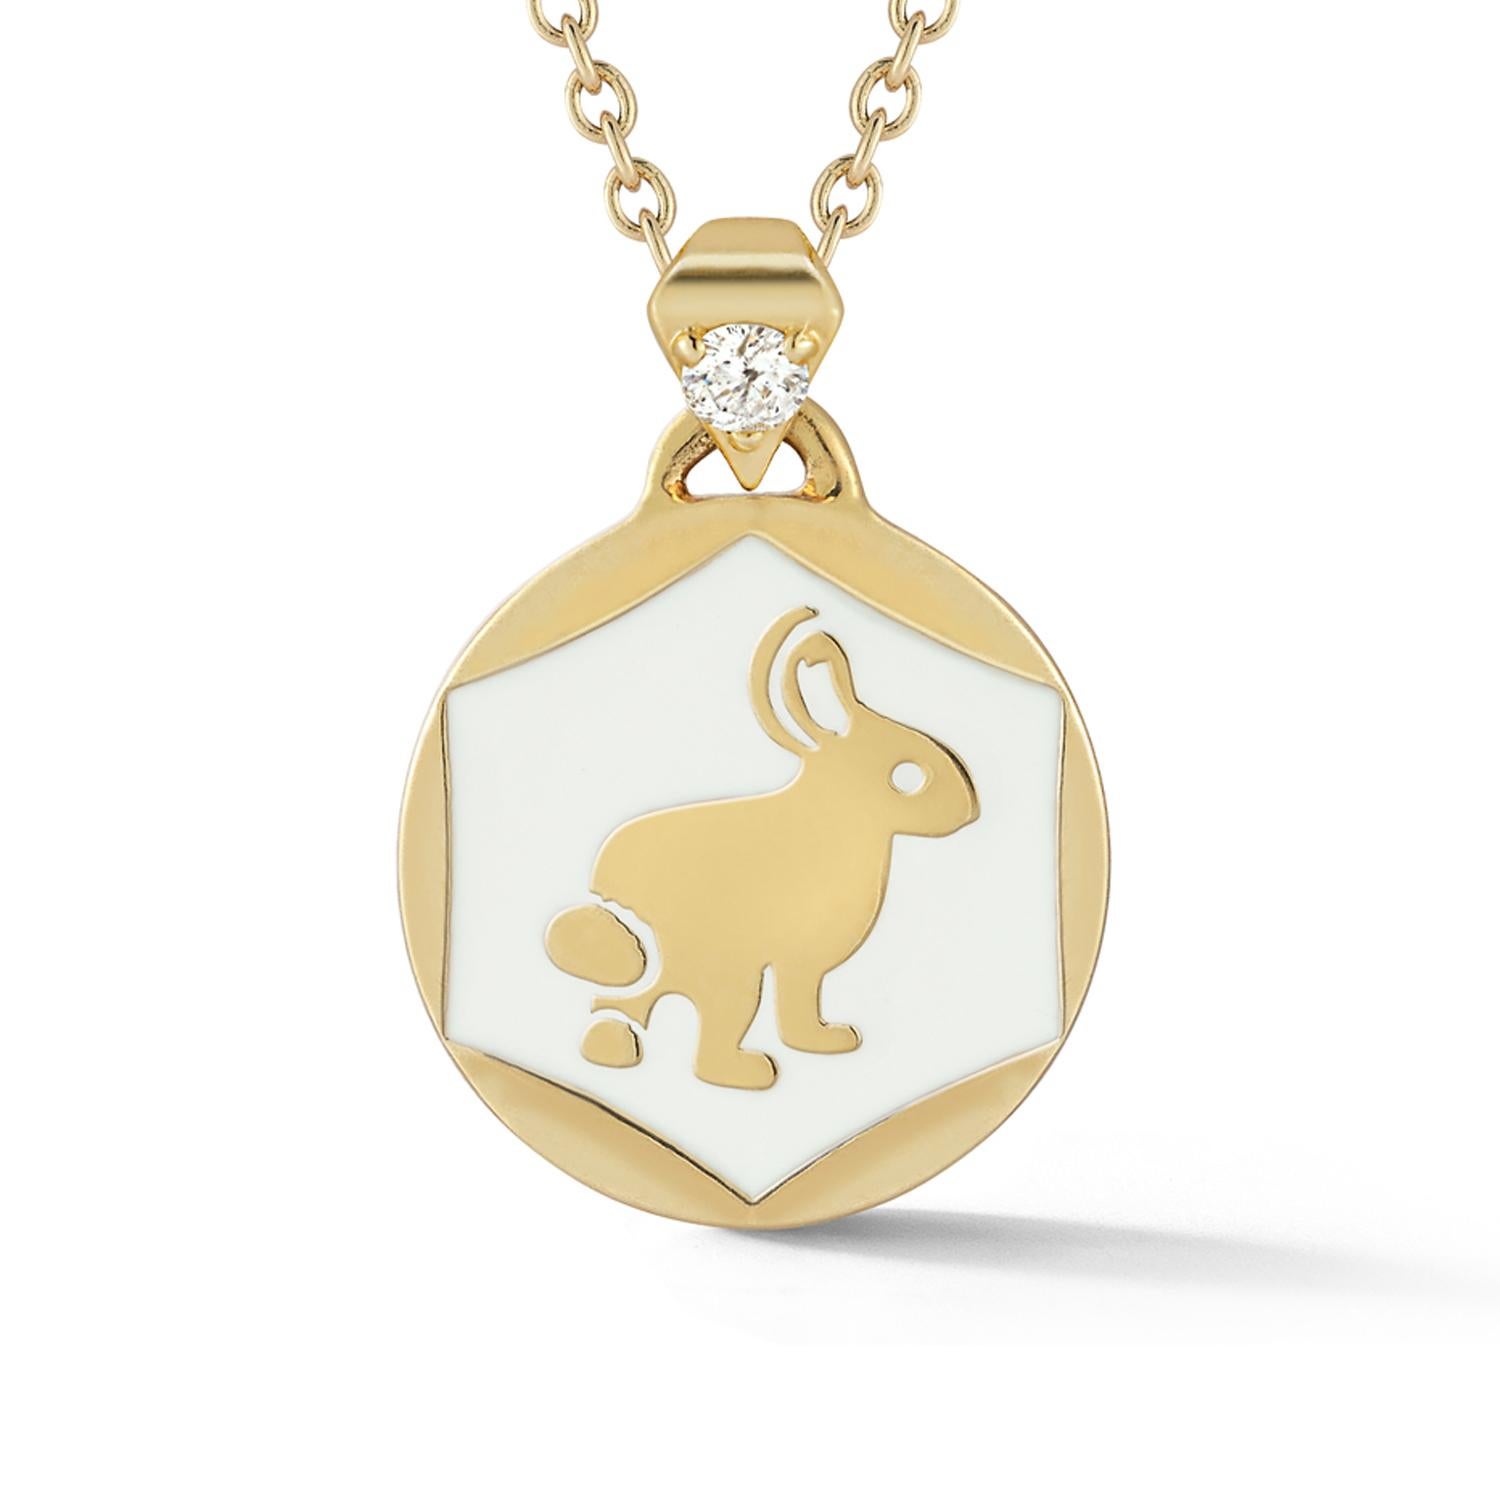 This white enamel pendant with a diamond on its bale is for animal lovers as well as those inspired by Alice in Wonderland. Rabbits are known to symbolize abundance and good fortune. They have extremely sensitive organs and are highly intuitive due